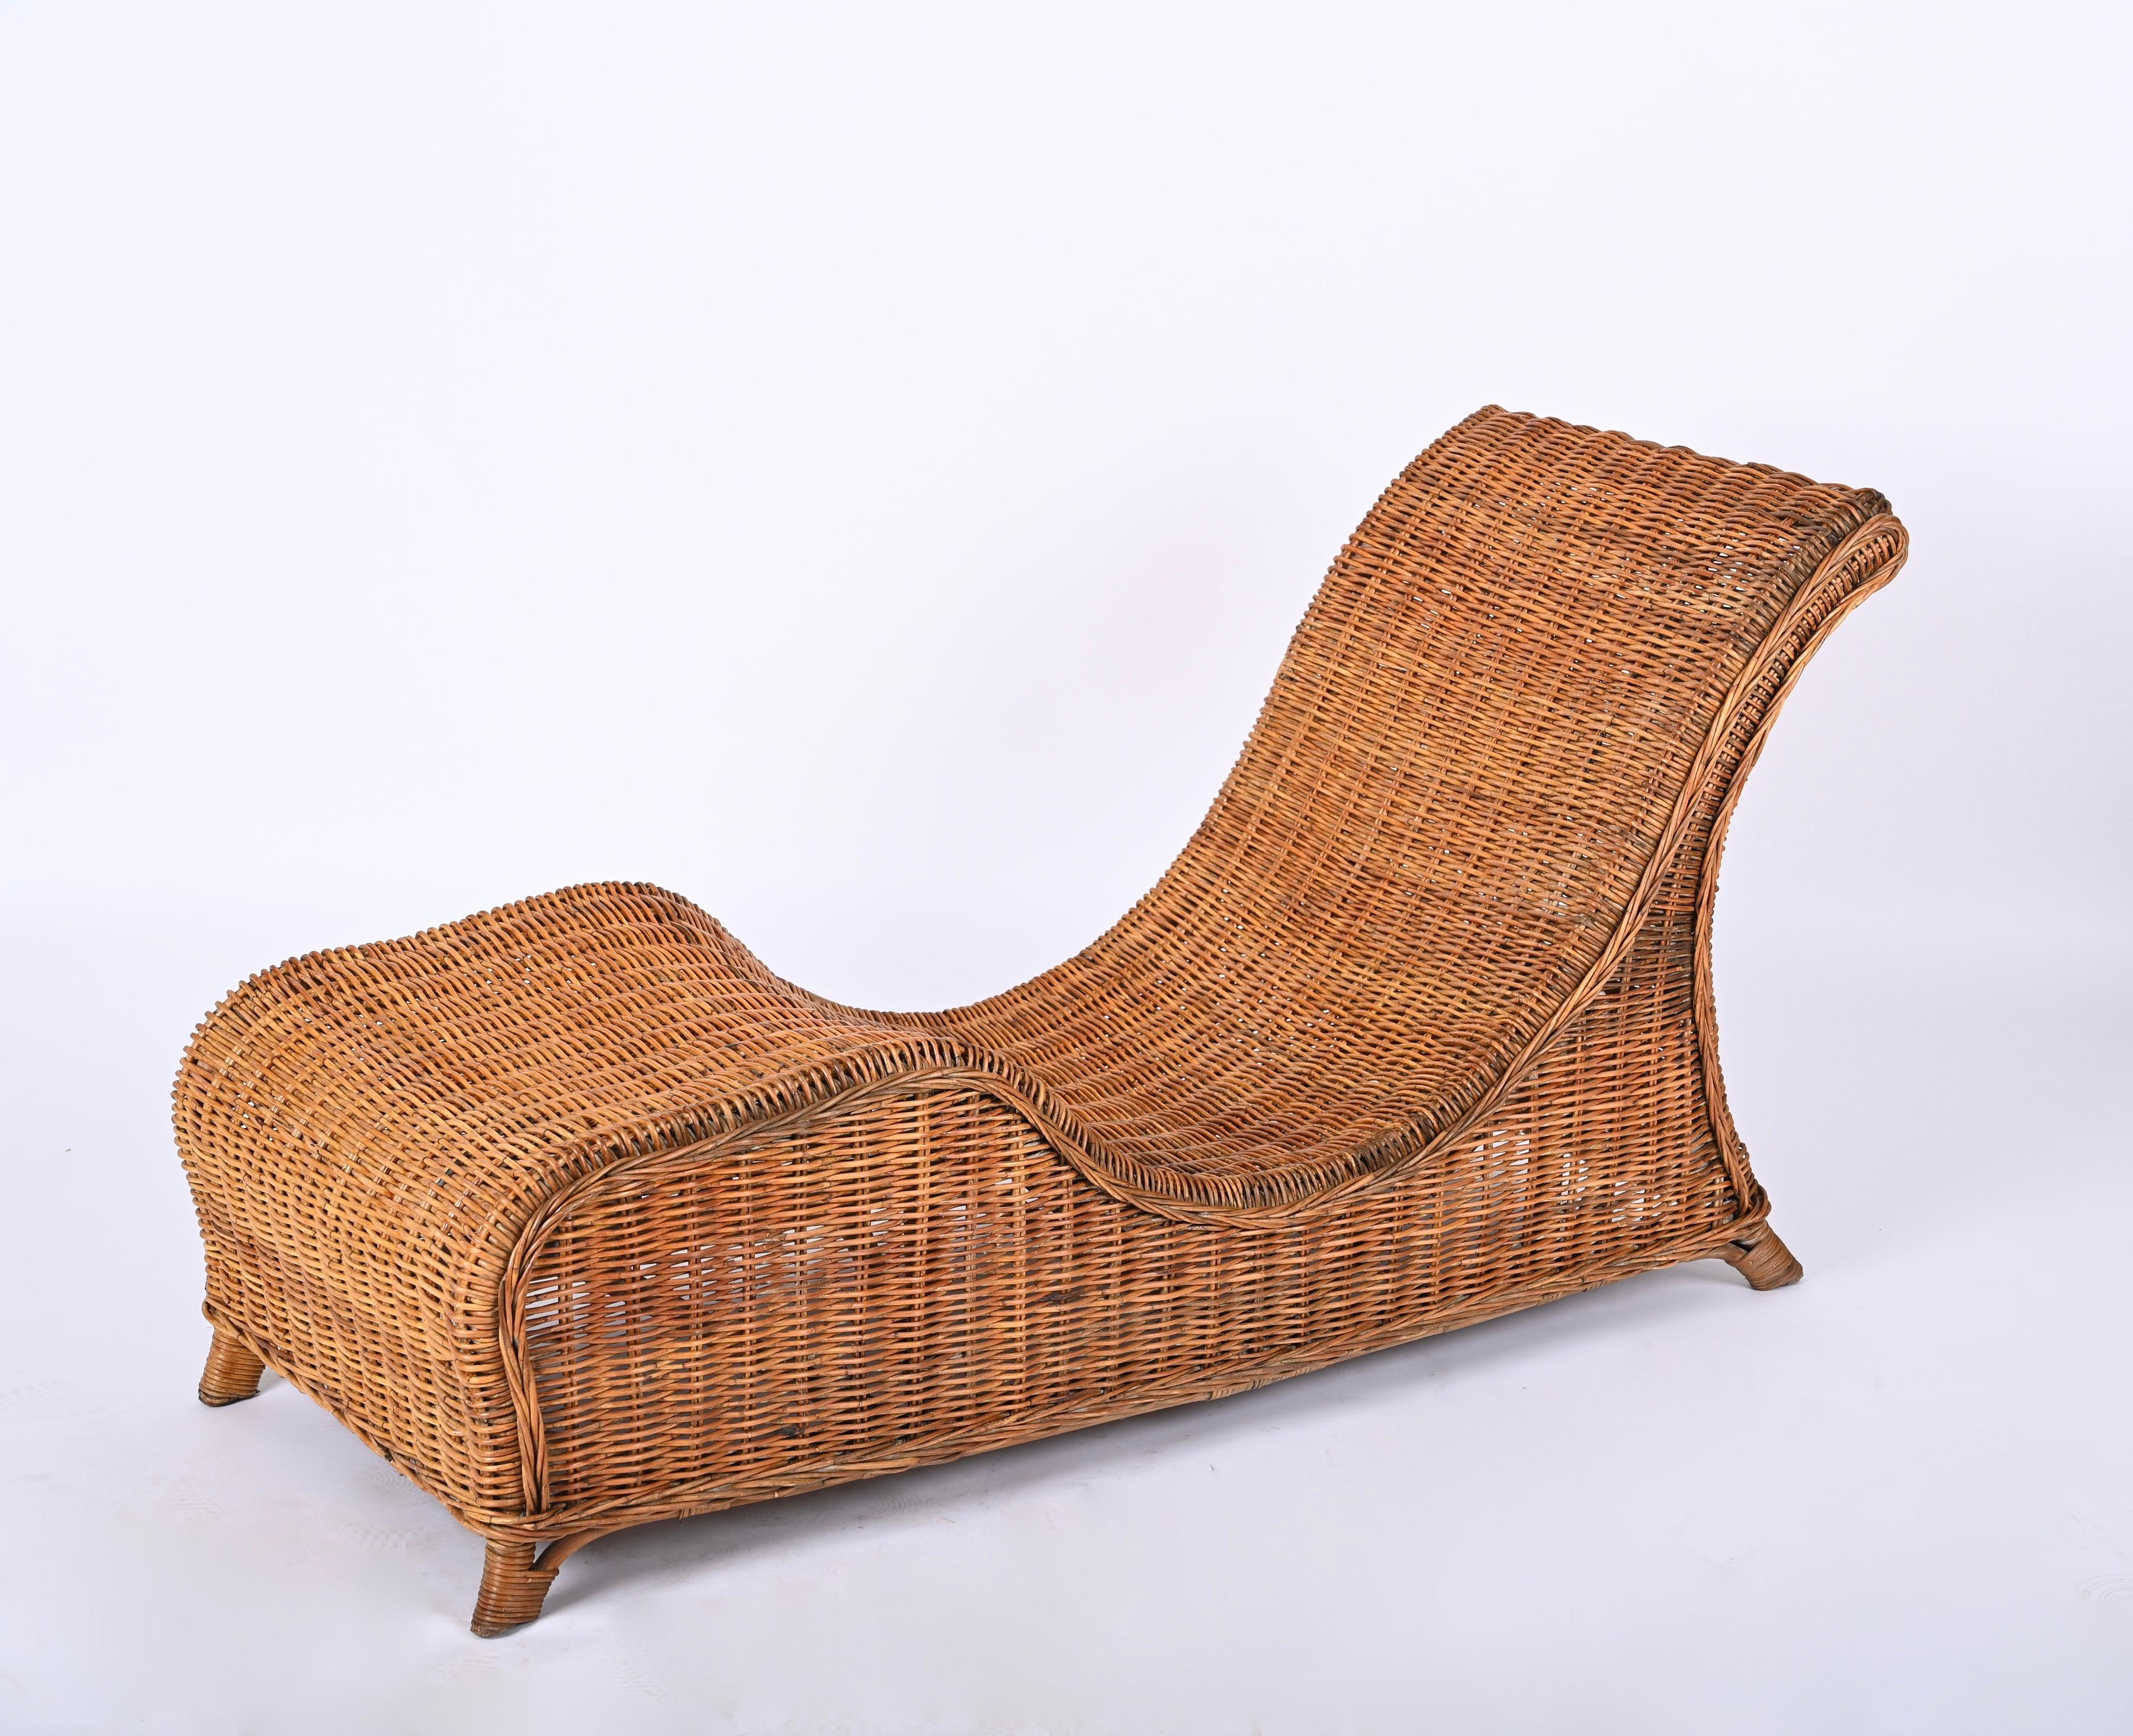 Midcentury Modern Bamboo and Wicker Italian Chaise Longue, 1960s For Sale 6